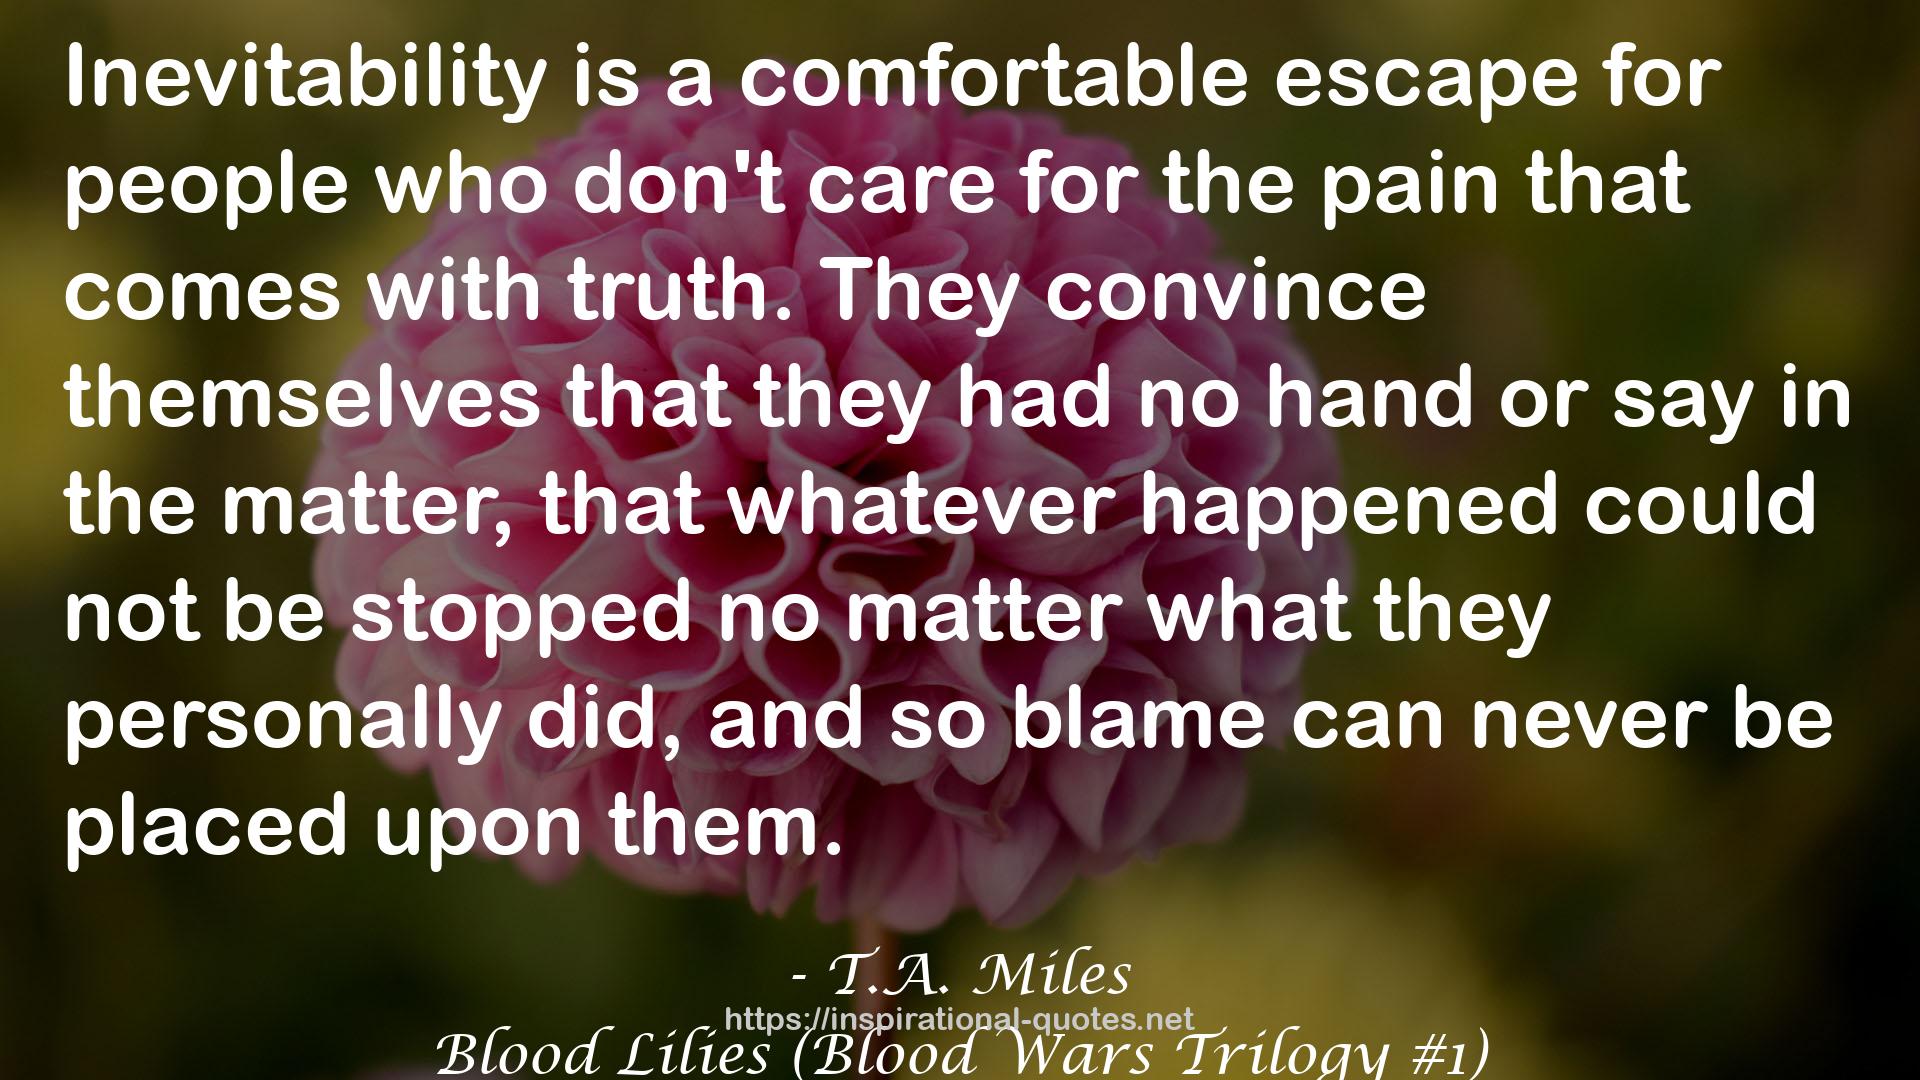 Blood Lilies (Blood Wars Trilogy #1) QUOTES